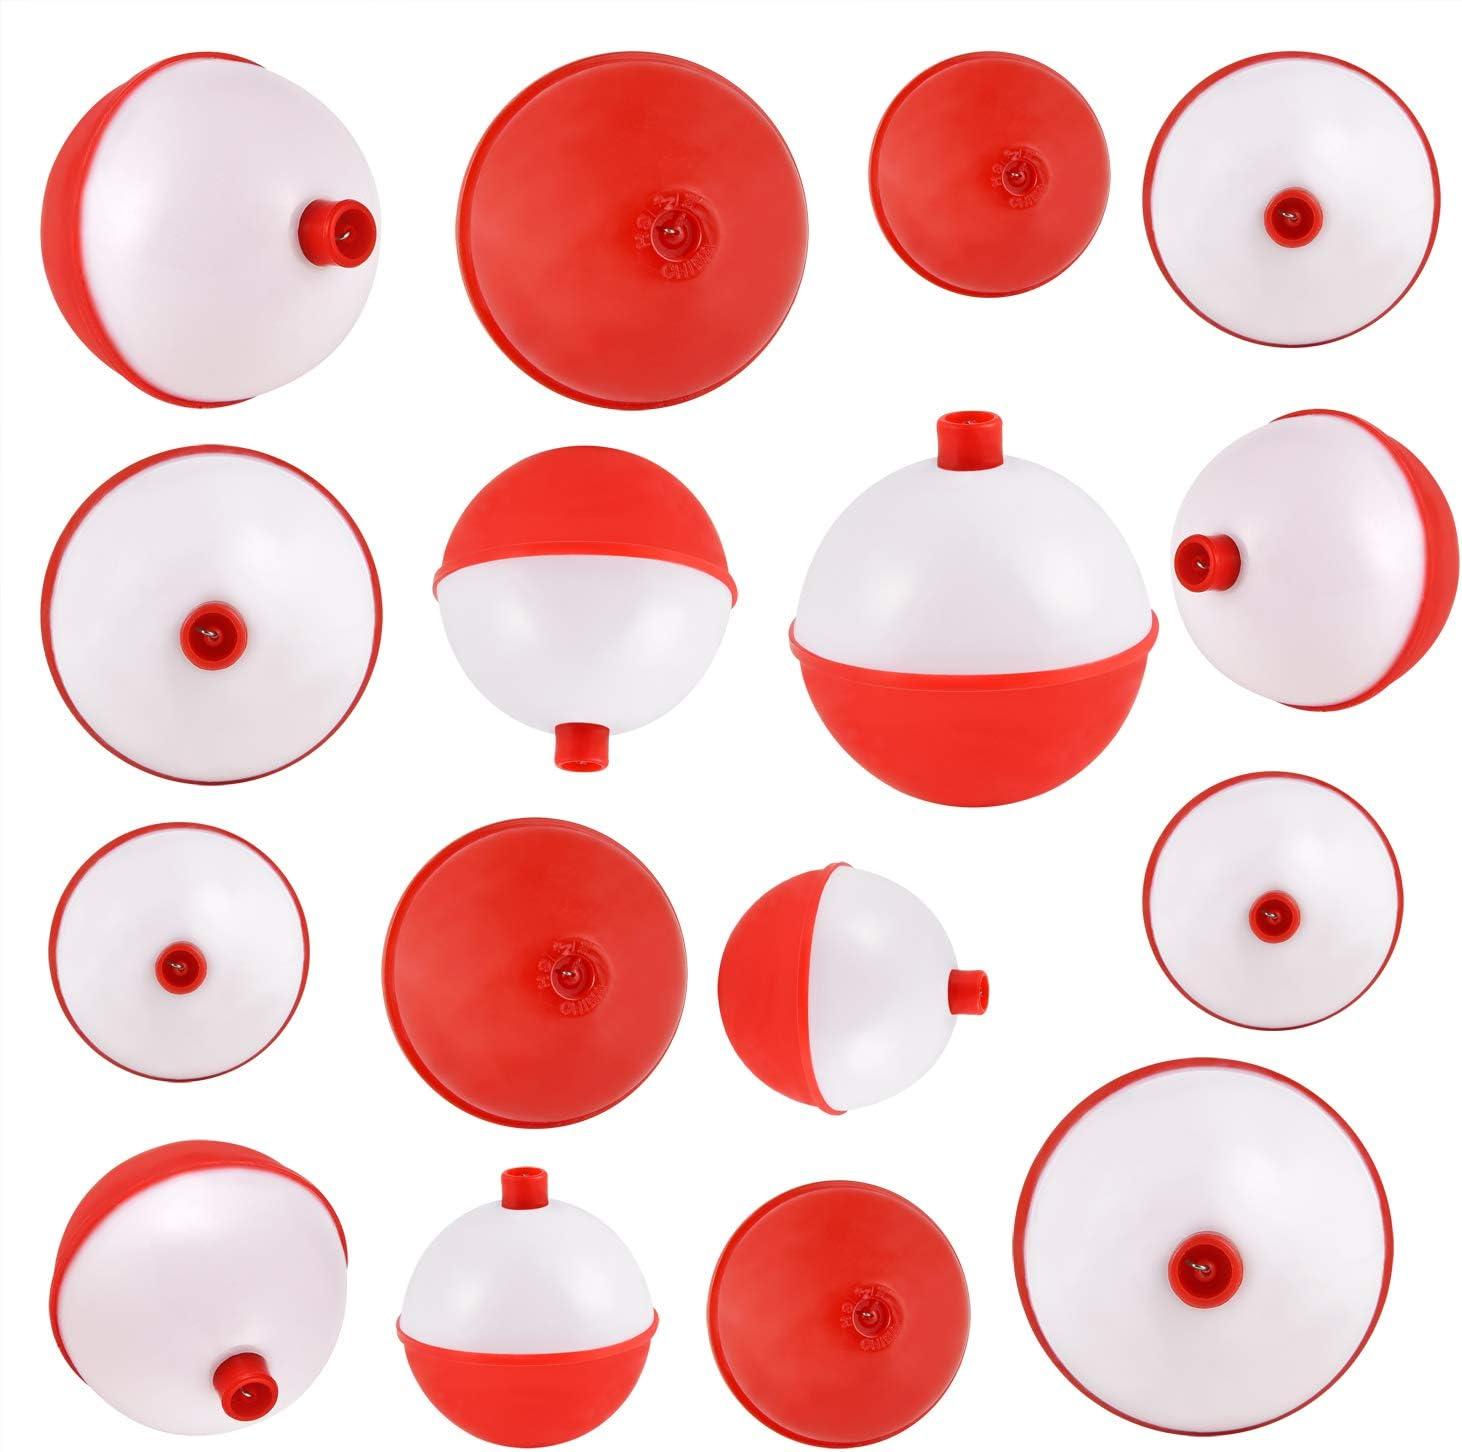 Coopay Fishing Bobbers 30Pcs-50Pcs/Lot Hard ABS Fishing Floats Set Snap on  Float Red/White Bobbers Push Button Round Buoy Floats Fishing Tackle  Accessories 0.5+1+1.25+1.5+250pcs